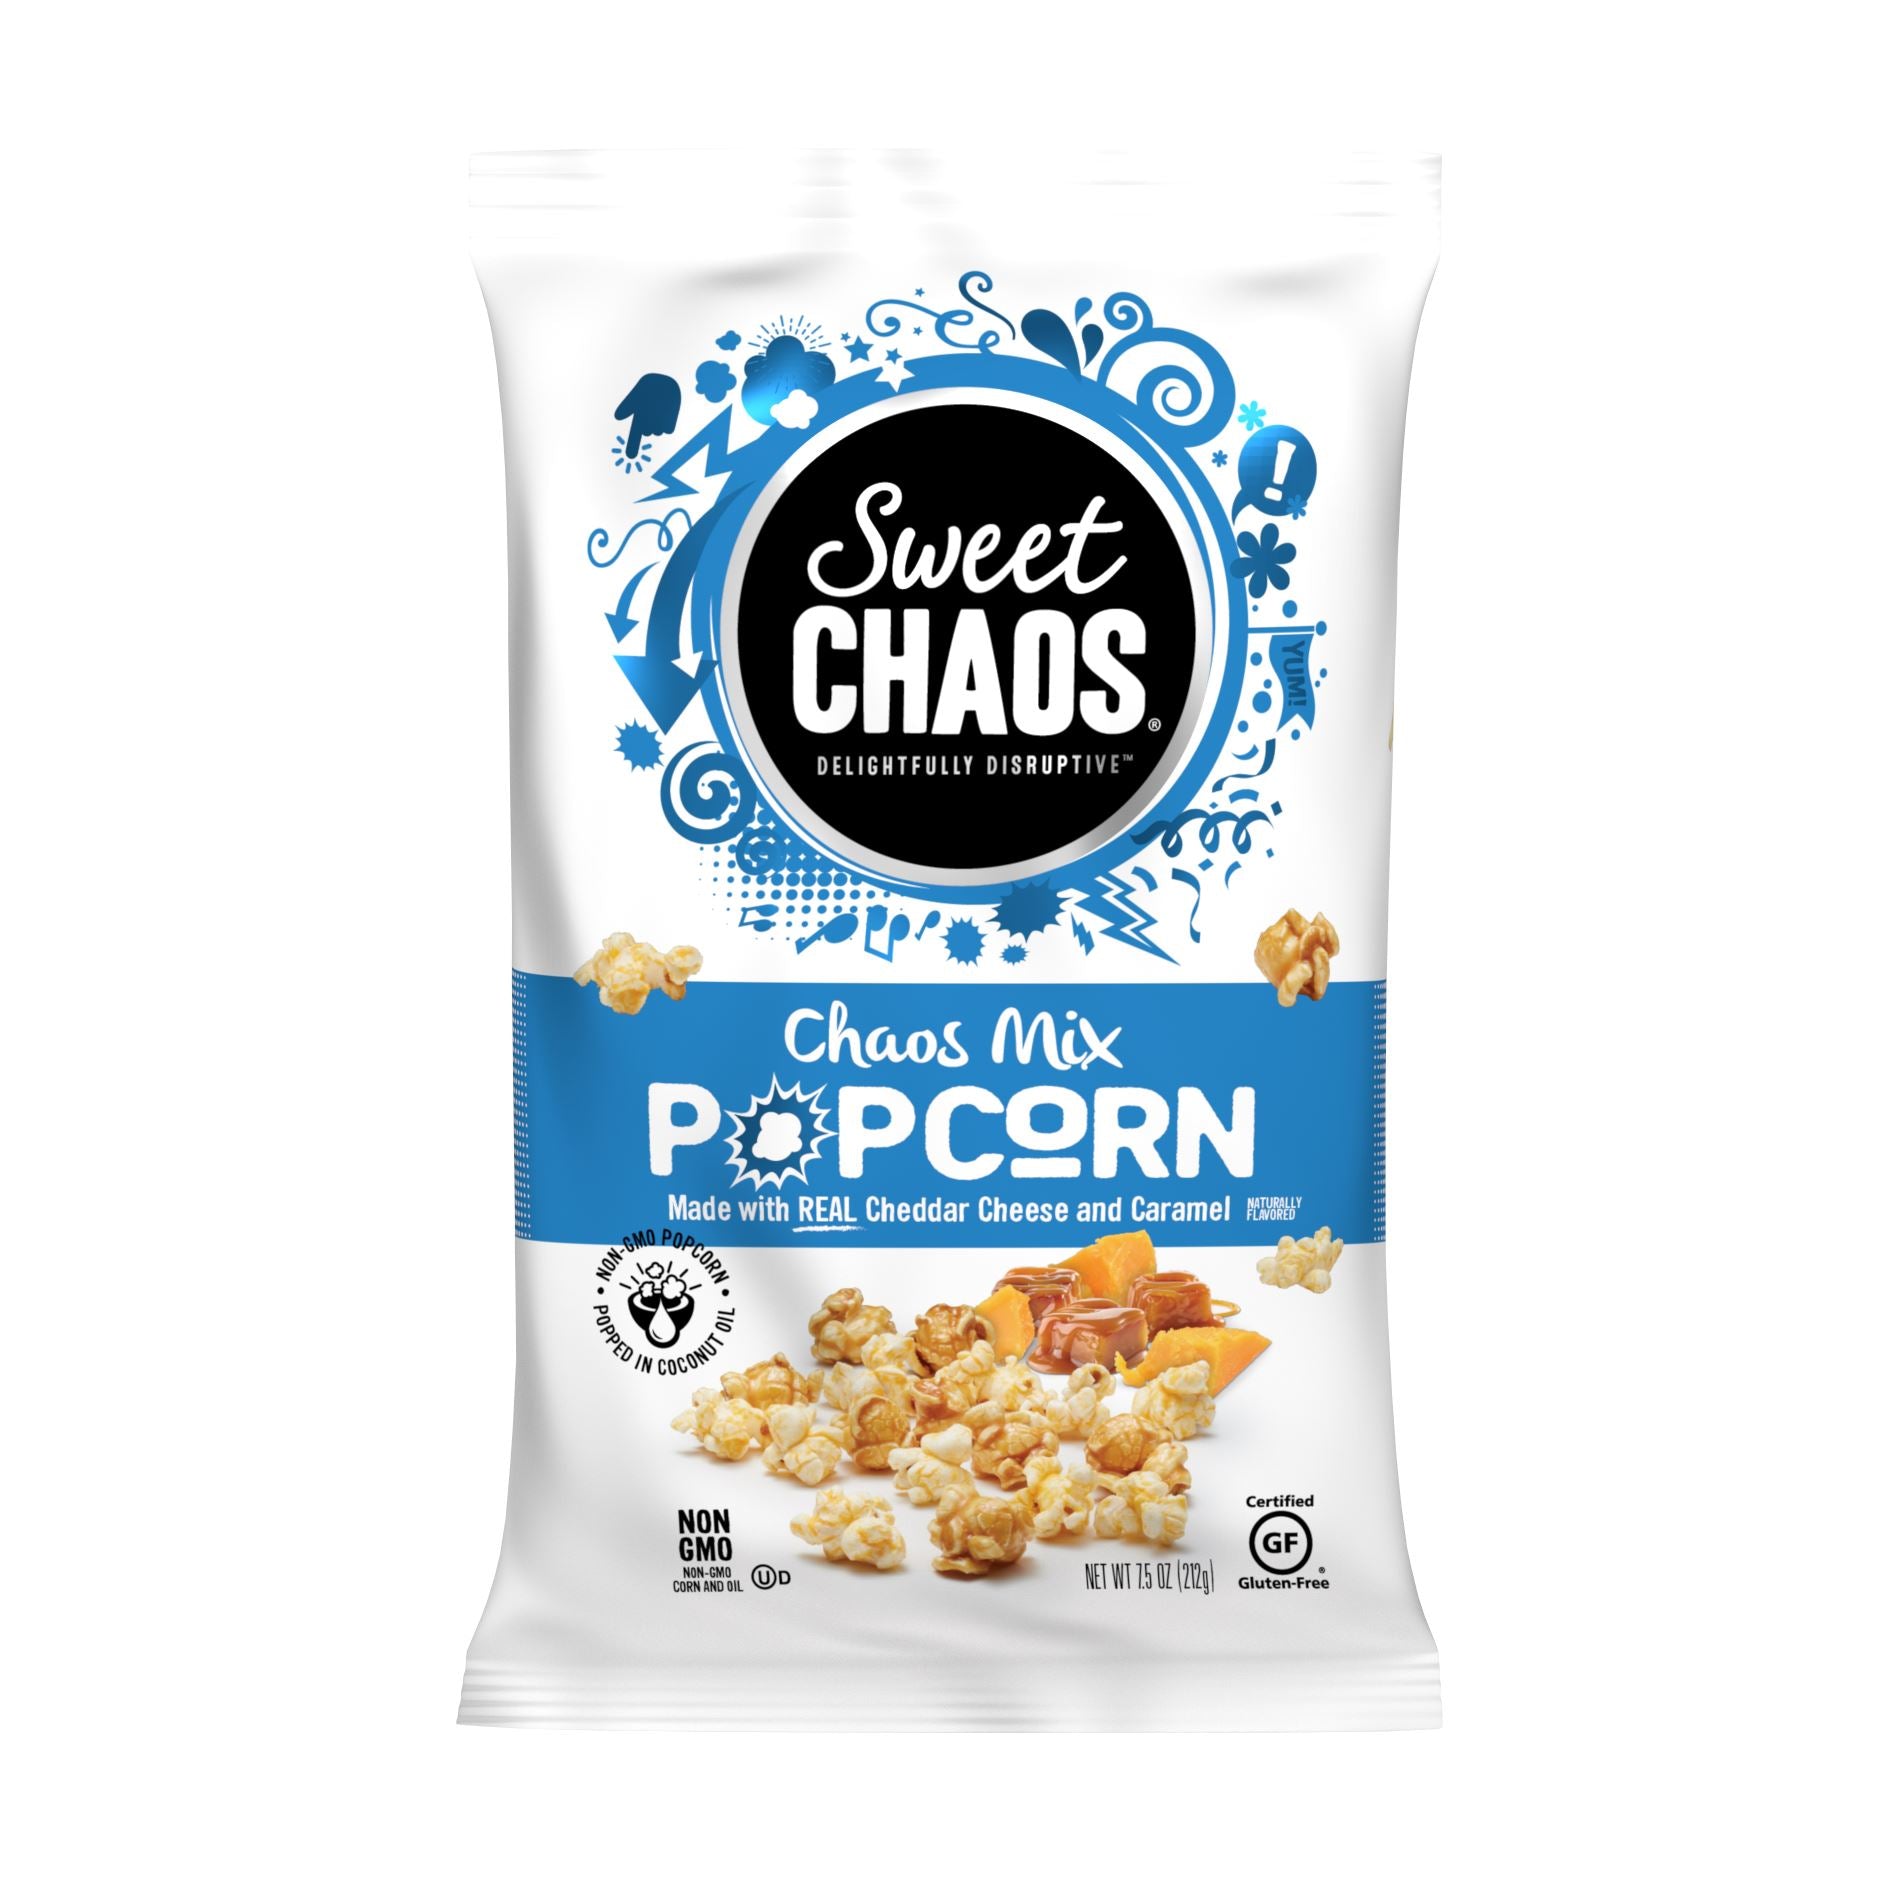 Sweet Chaos Drizzled Popcorns Sweet Chaos Chaos Mix 7.05 Ounce 